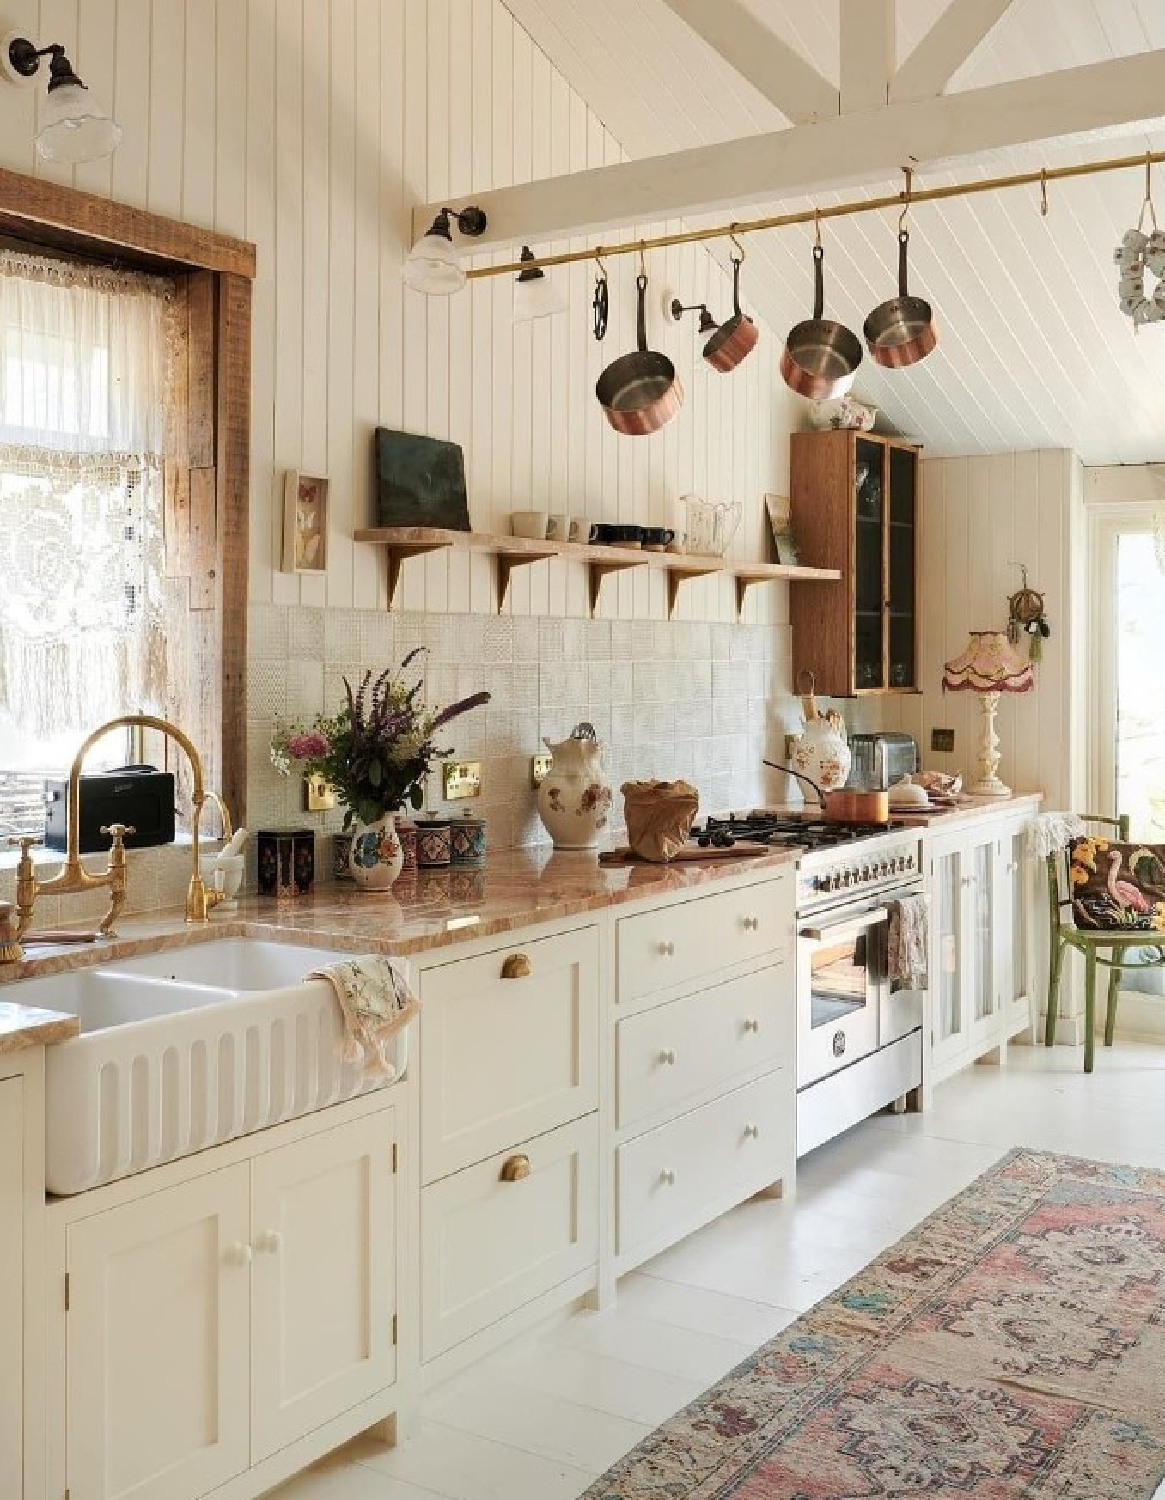 deVOL Kitchens beautiful English country bespoke kitchen with pale colors, brass pot rack, and touches of rose. #devolkitchens